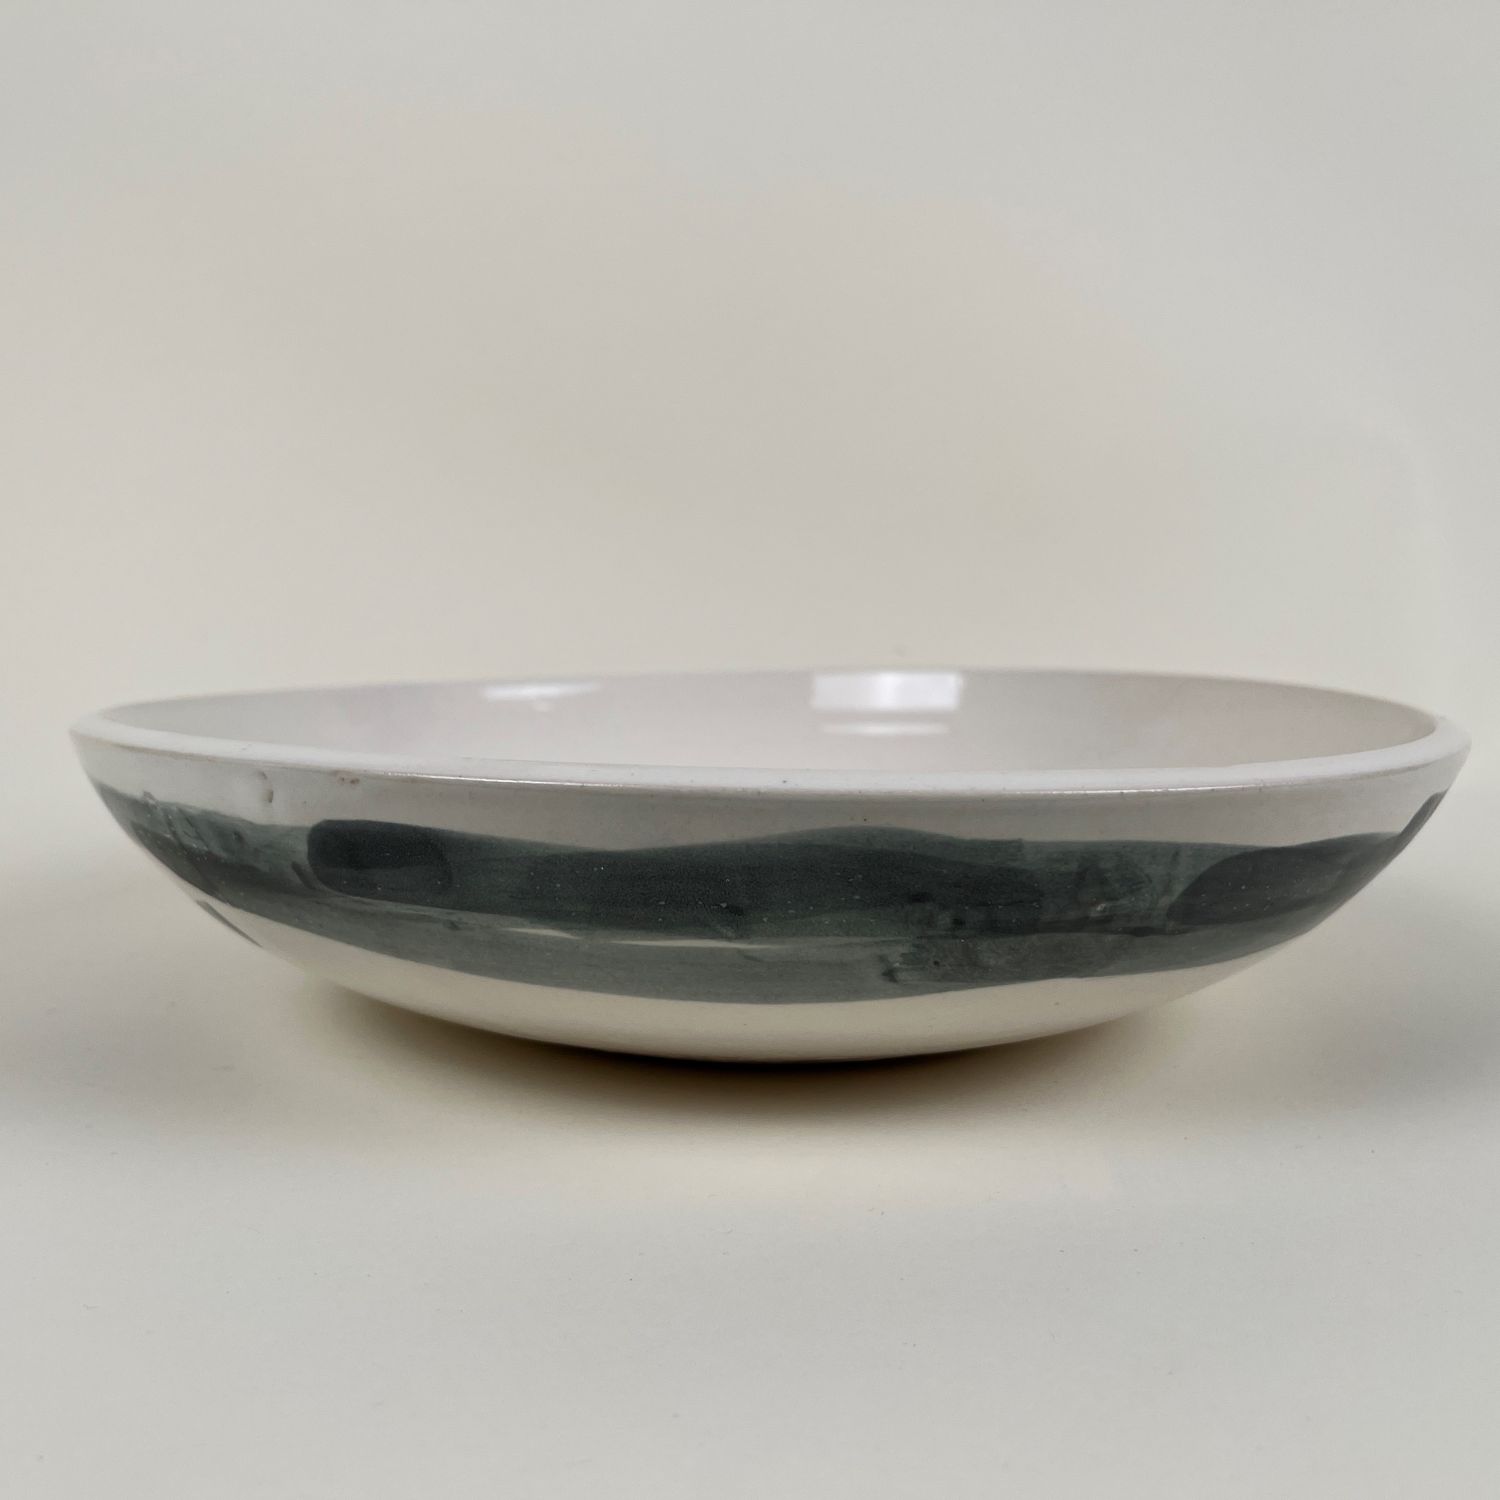 Suzanne Morrissette: Water Bowl Product Image 1 of 1